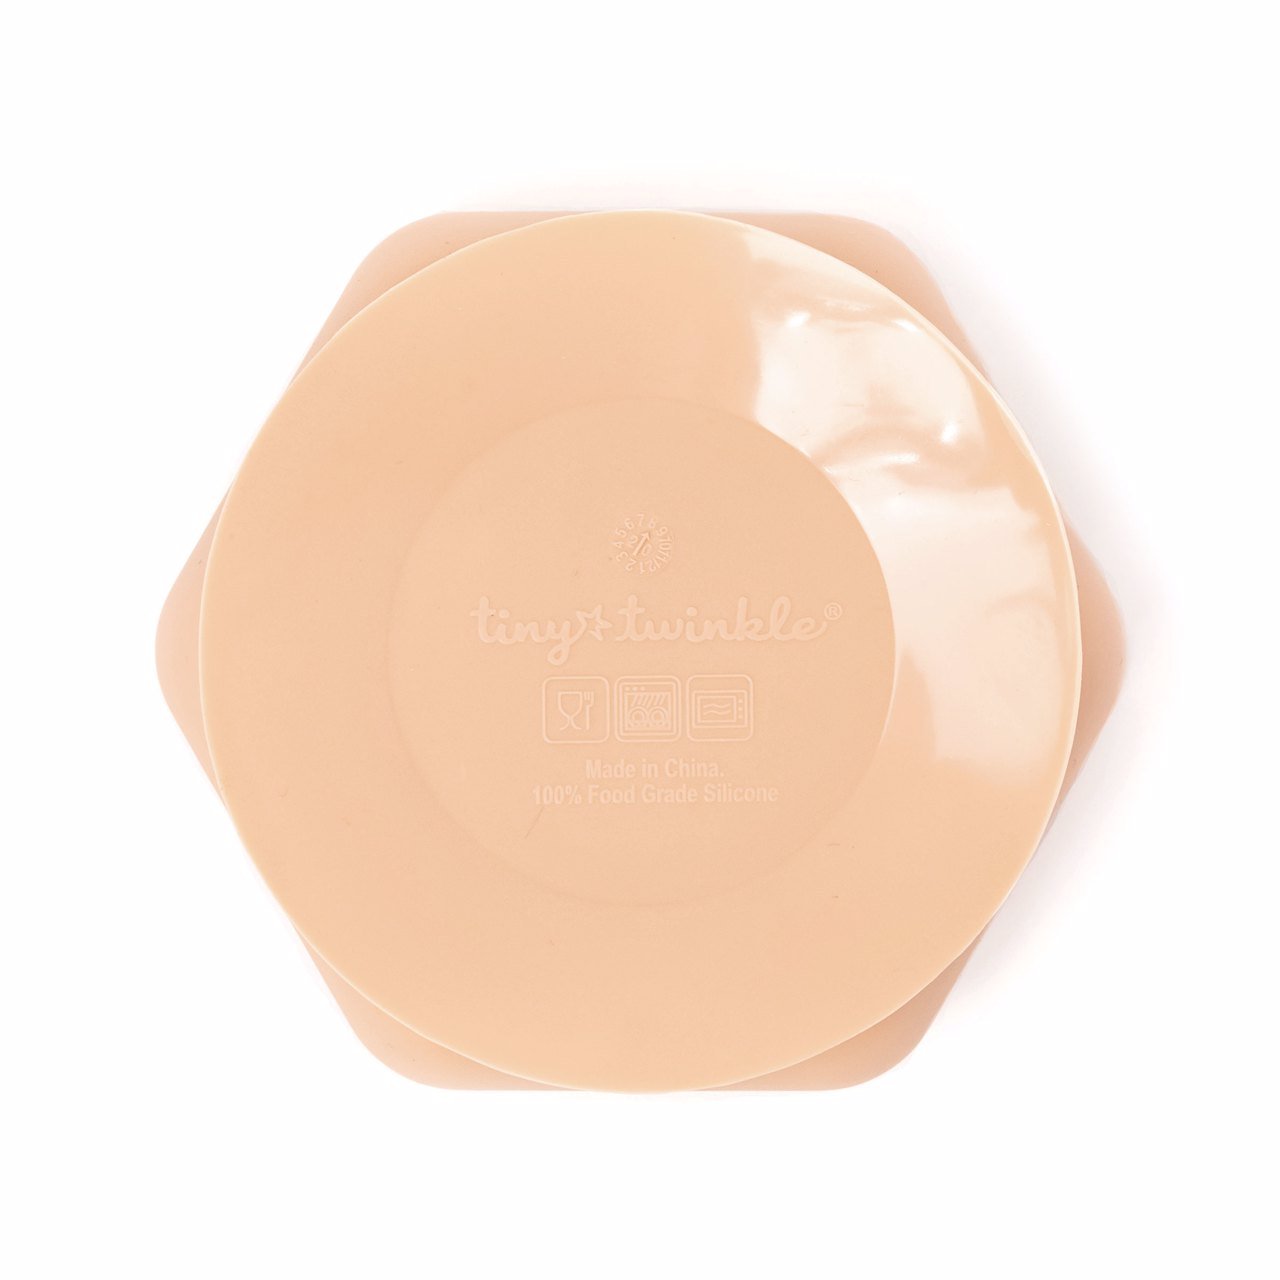 Tiny Twinkle - Silicone Bowl and Lid Set - Sand